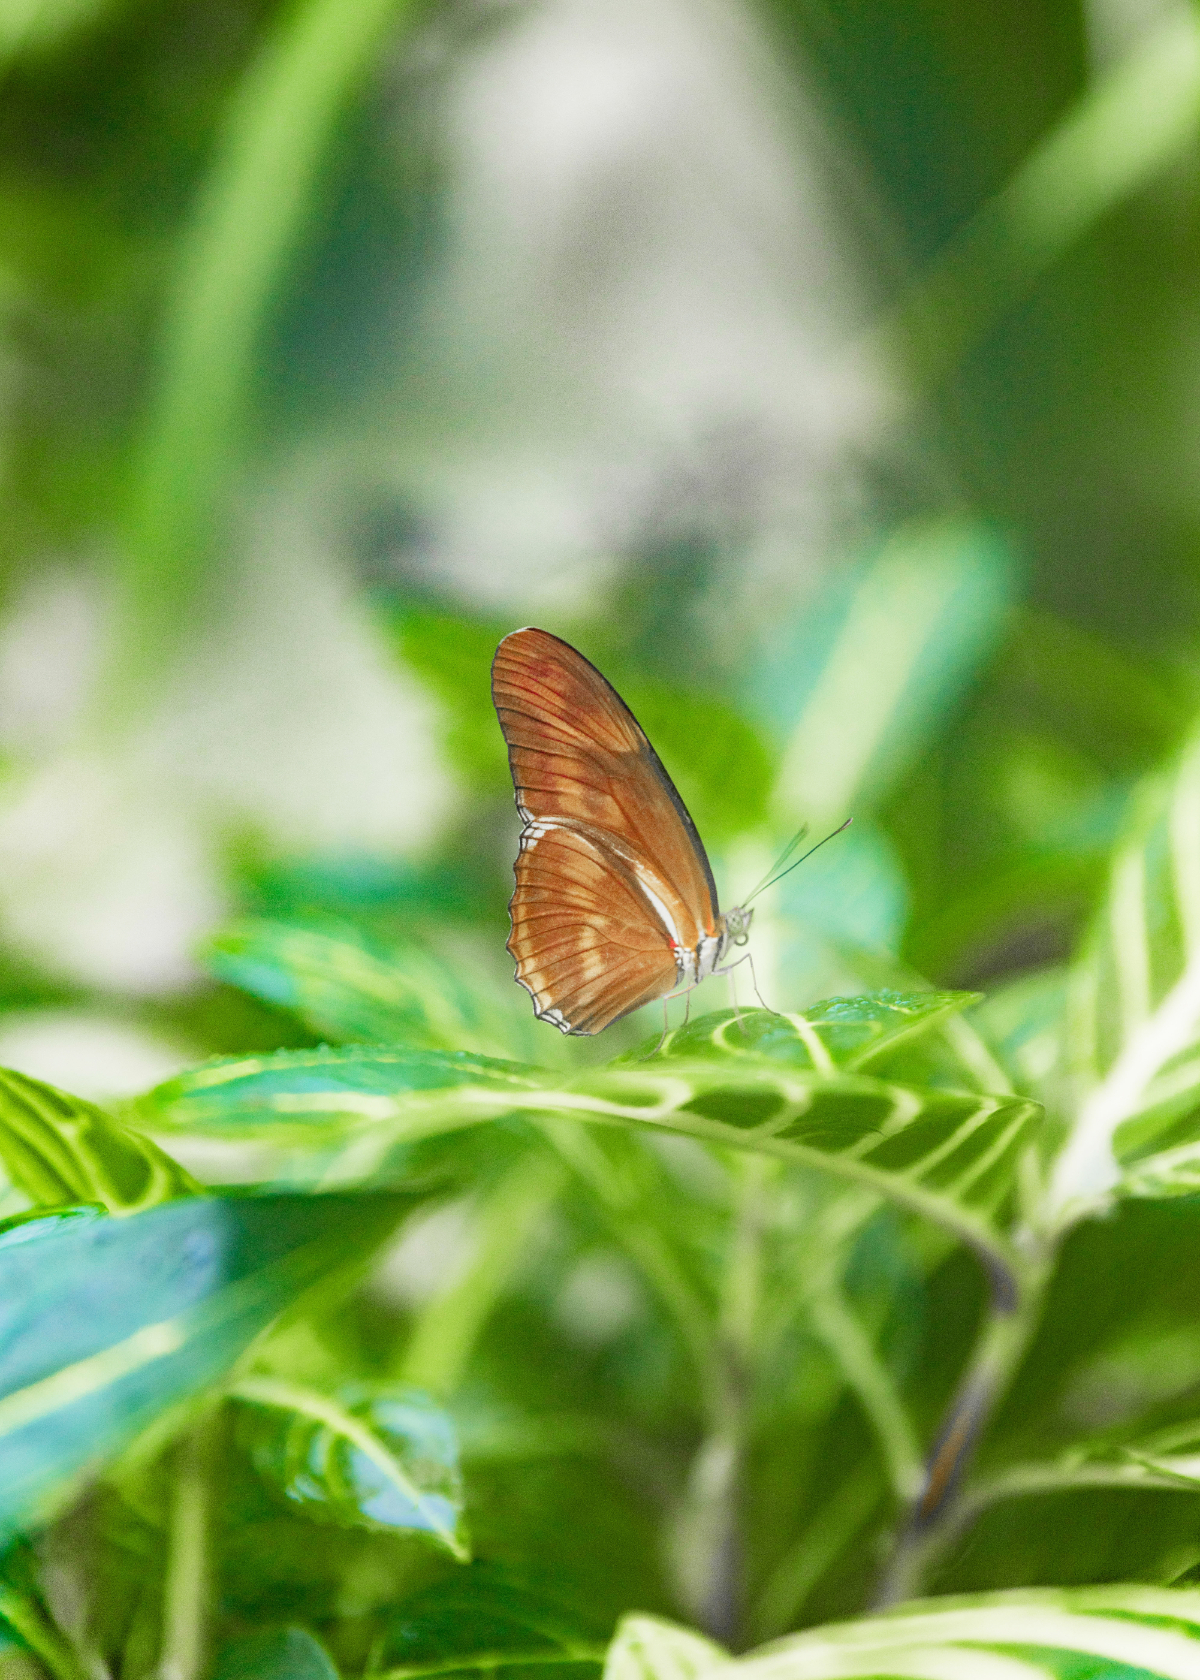 Butterfly in Key West Florida sits on a leafy, green plant in the conservatory